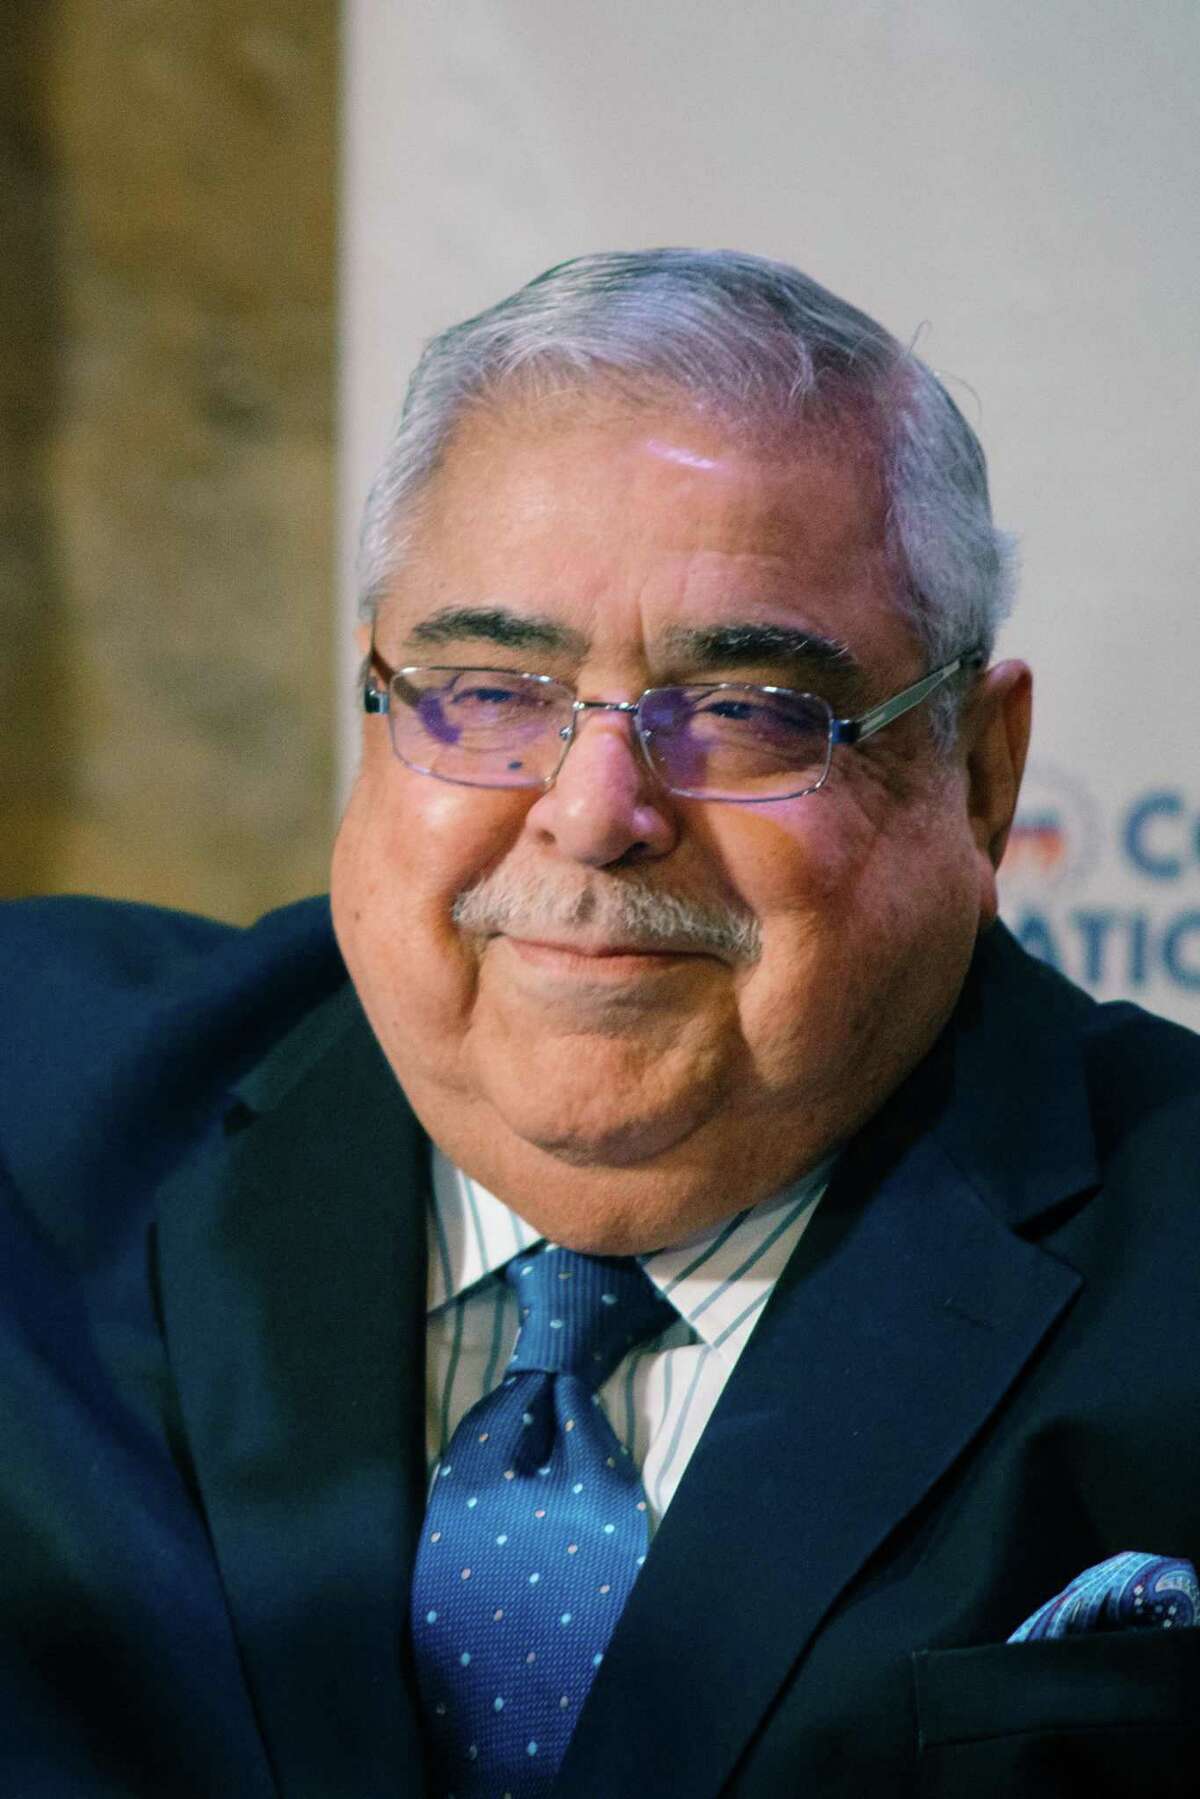 Paul Elizondo died unexpectedly Dec. 27. Elizondo was a mainstay on the Bexar County Commissioner’s Court since 1982 and roundly acknowledged as one of San Antonio’s major power brokers over the decades.